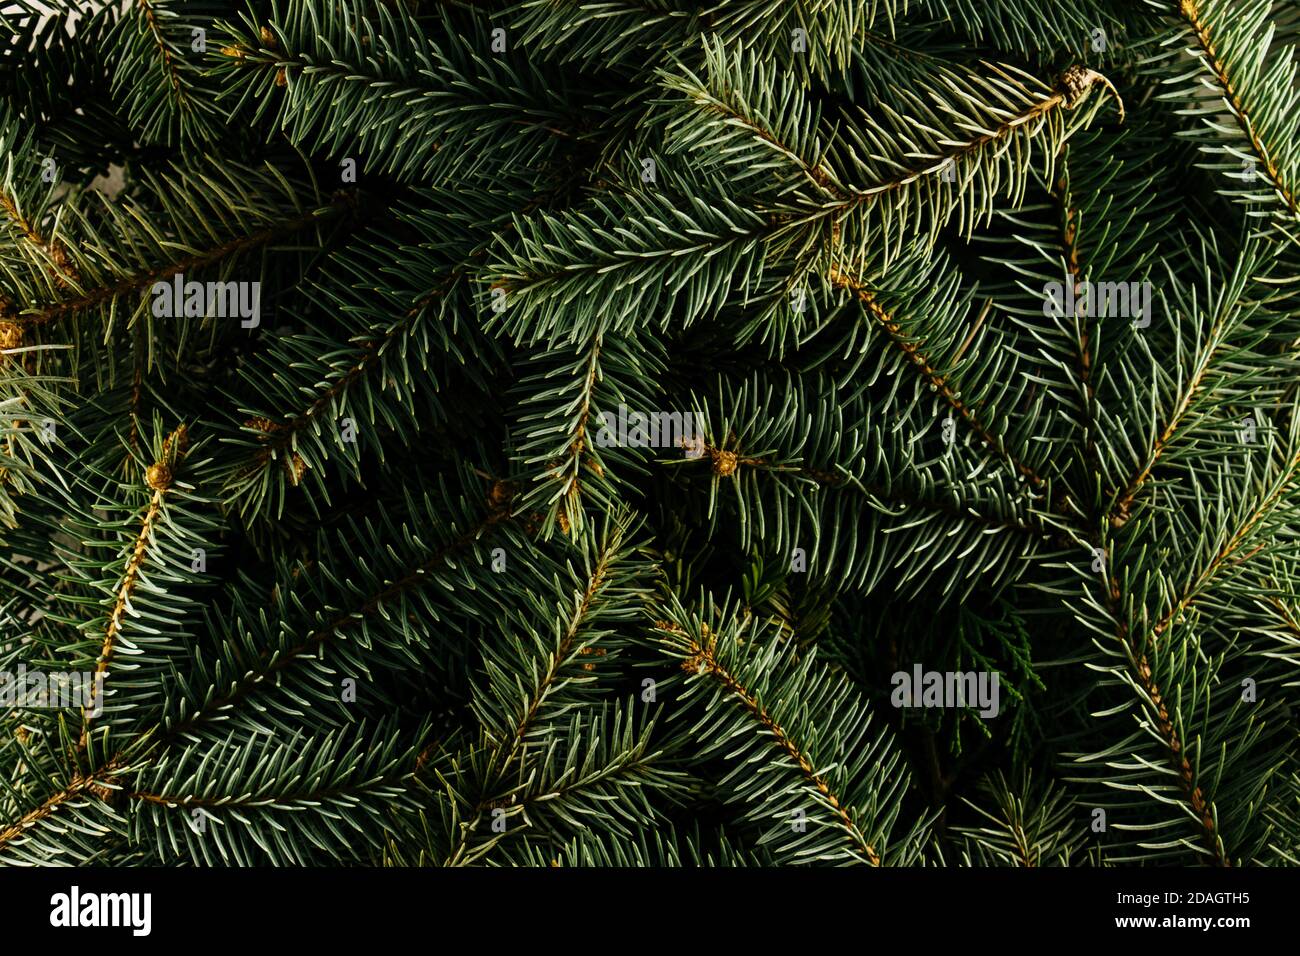 Layout made of Christmas tree branches. Nature New Year concept. Stock Photo